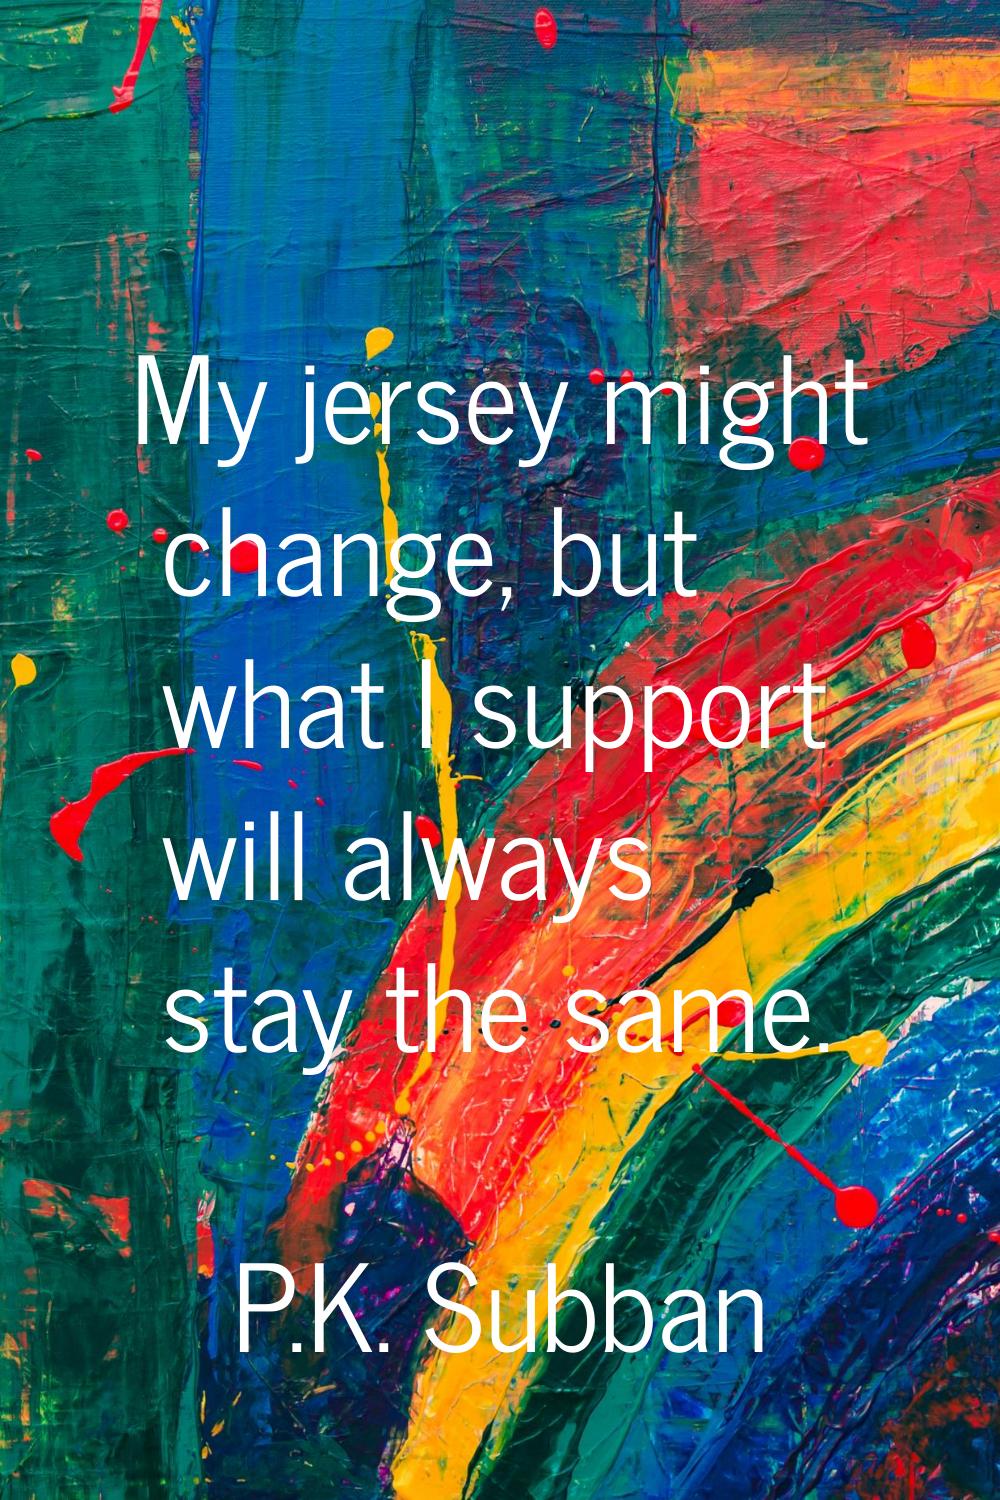 My jersey might change, but what I support will always stay the same.